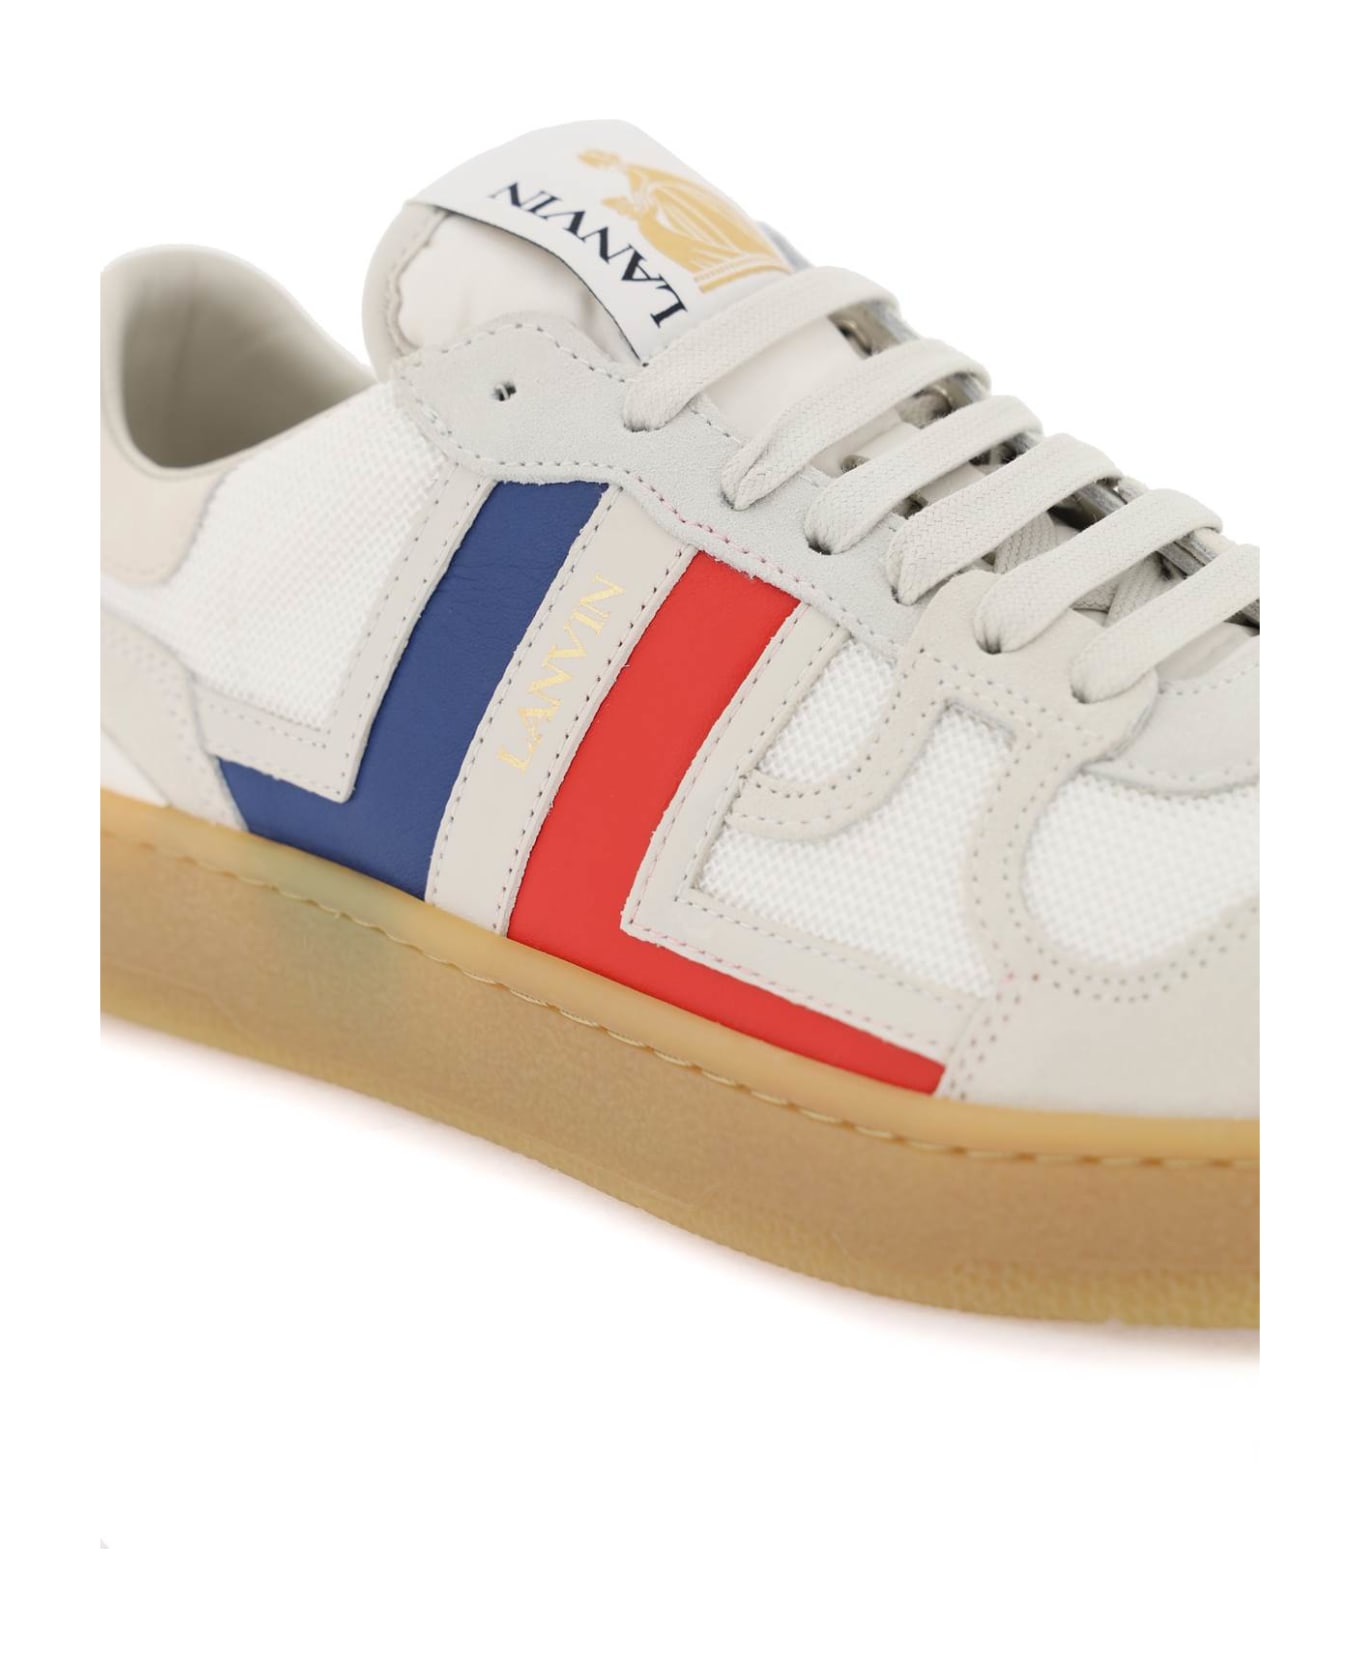 Lanvin 'clay Low' Sneakers - White